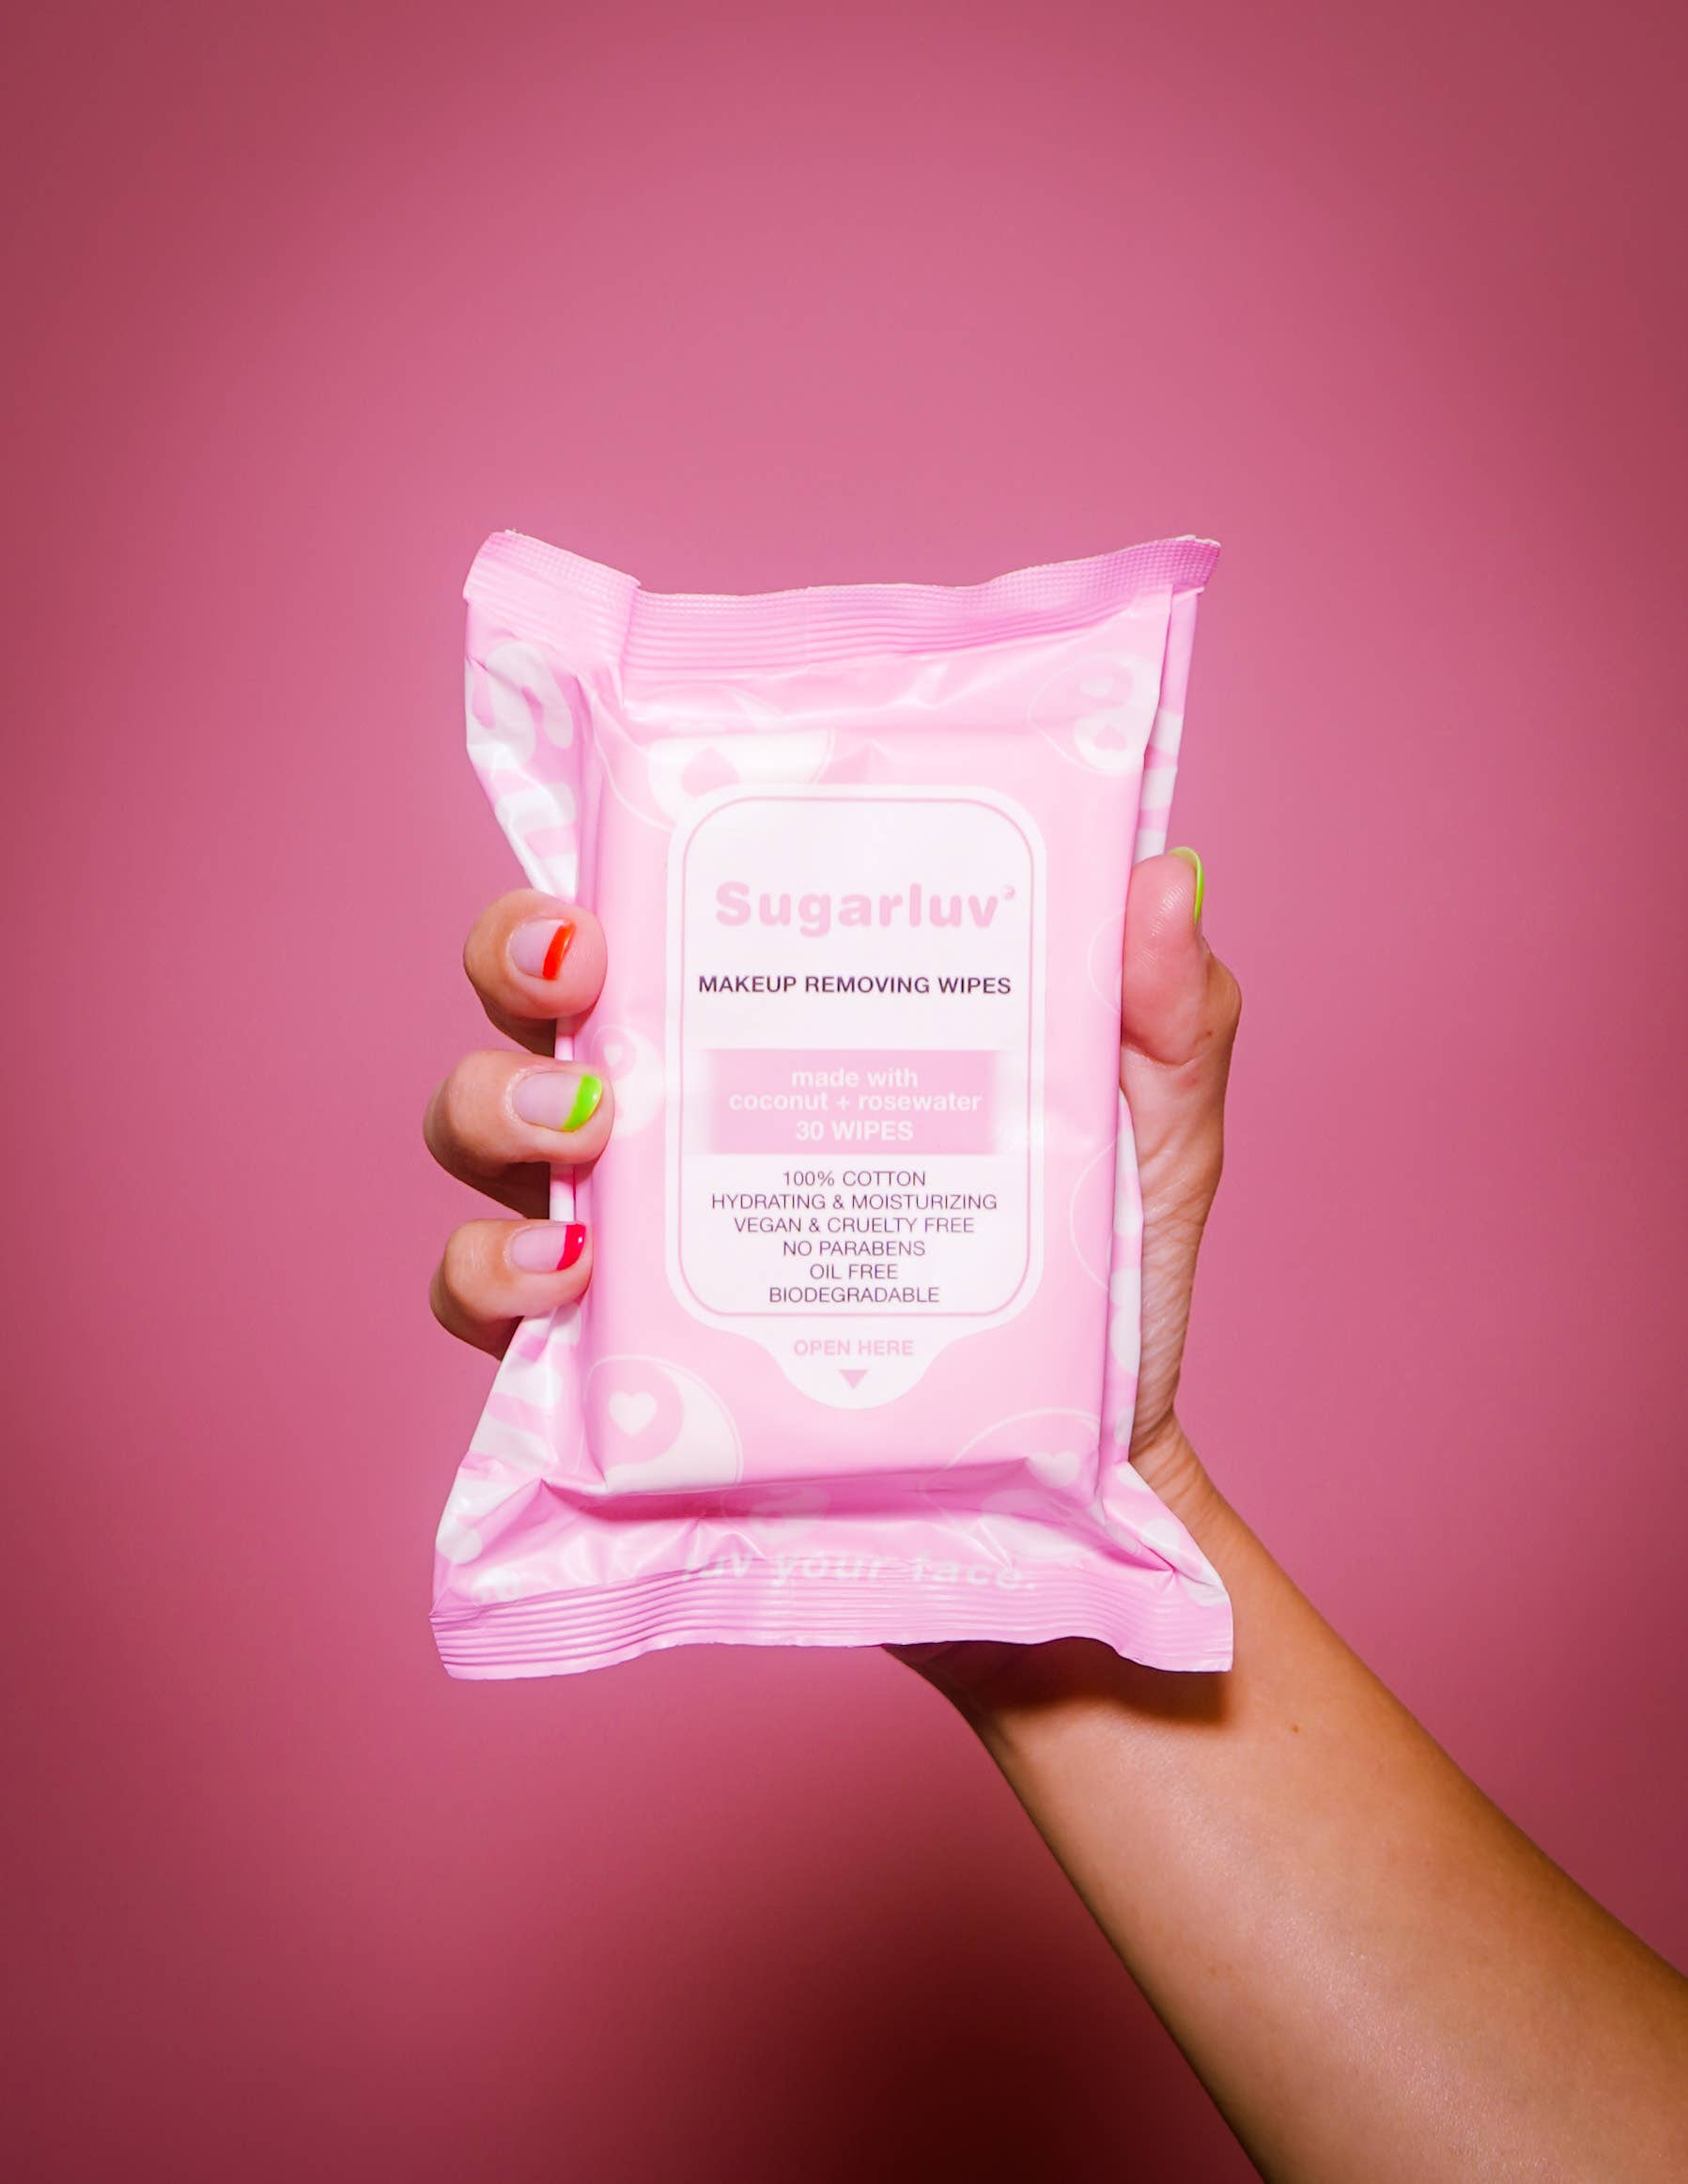 Sugarluv Makeup Remover Cleansing Wipes - Coconut/Rosewater 30 Count